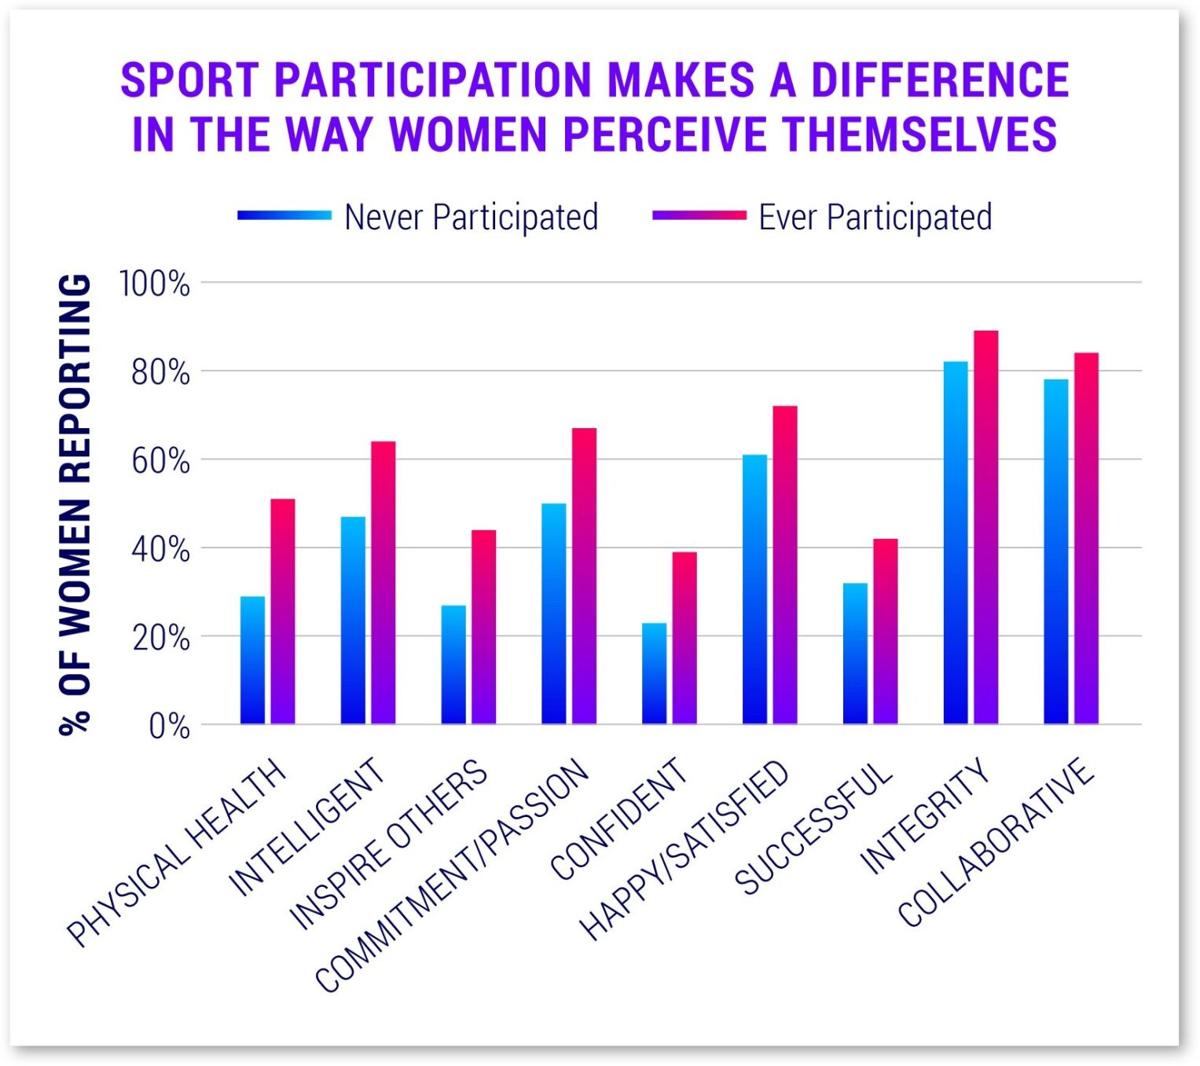 Women's participation in sports is declining, according to Canadian